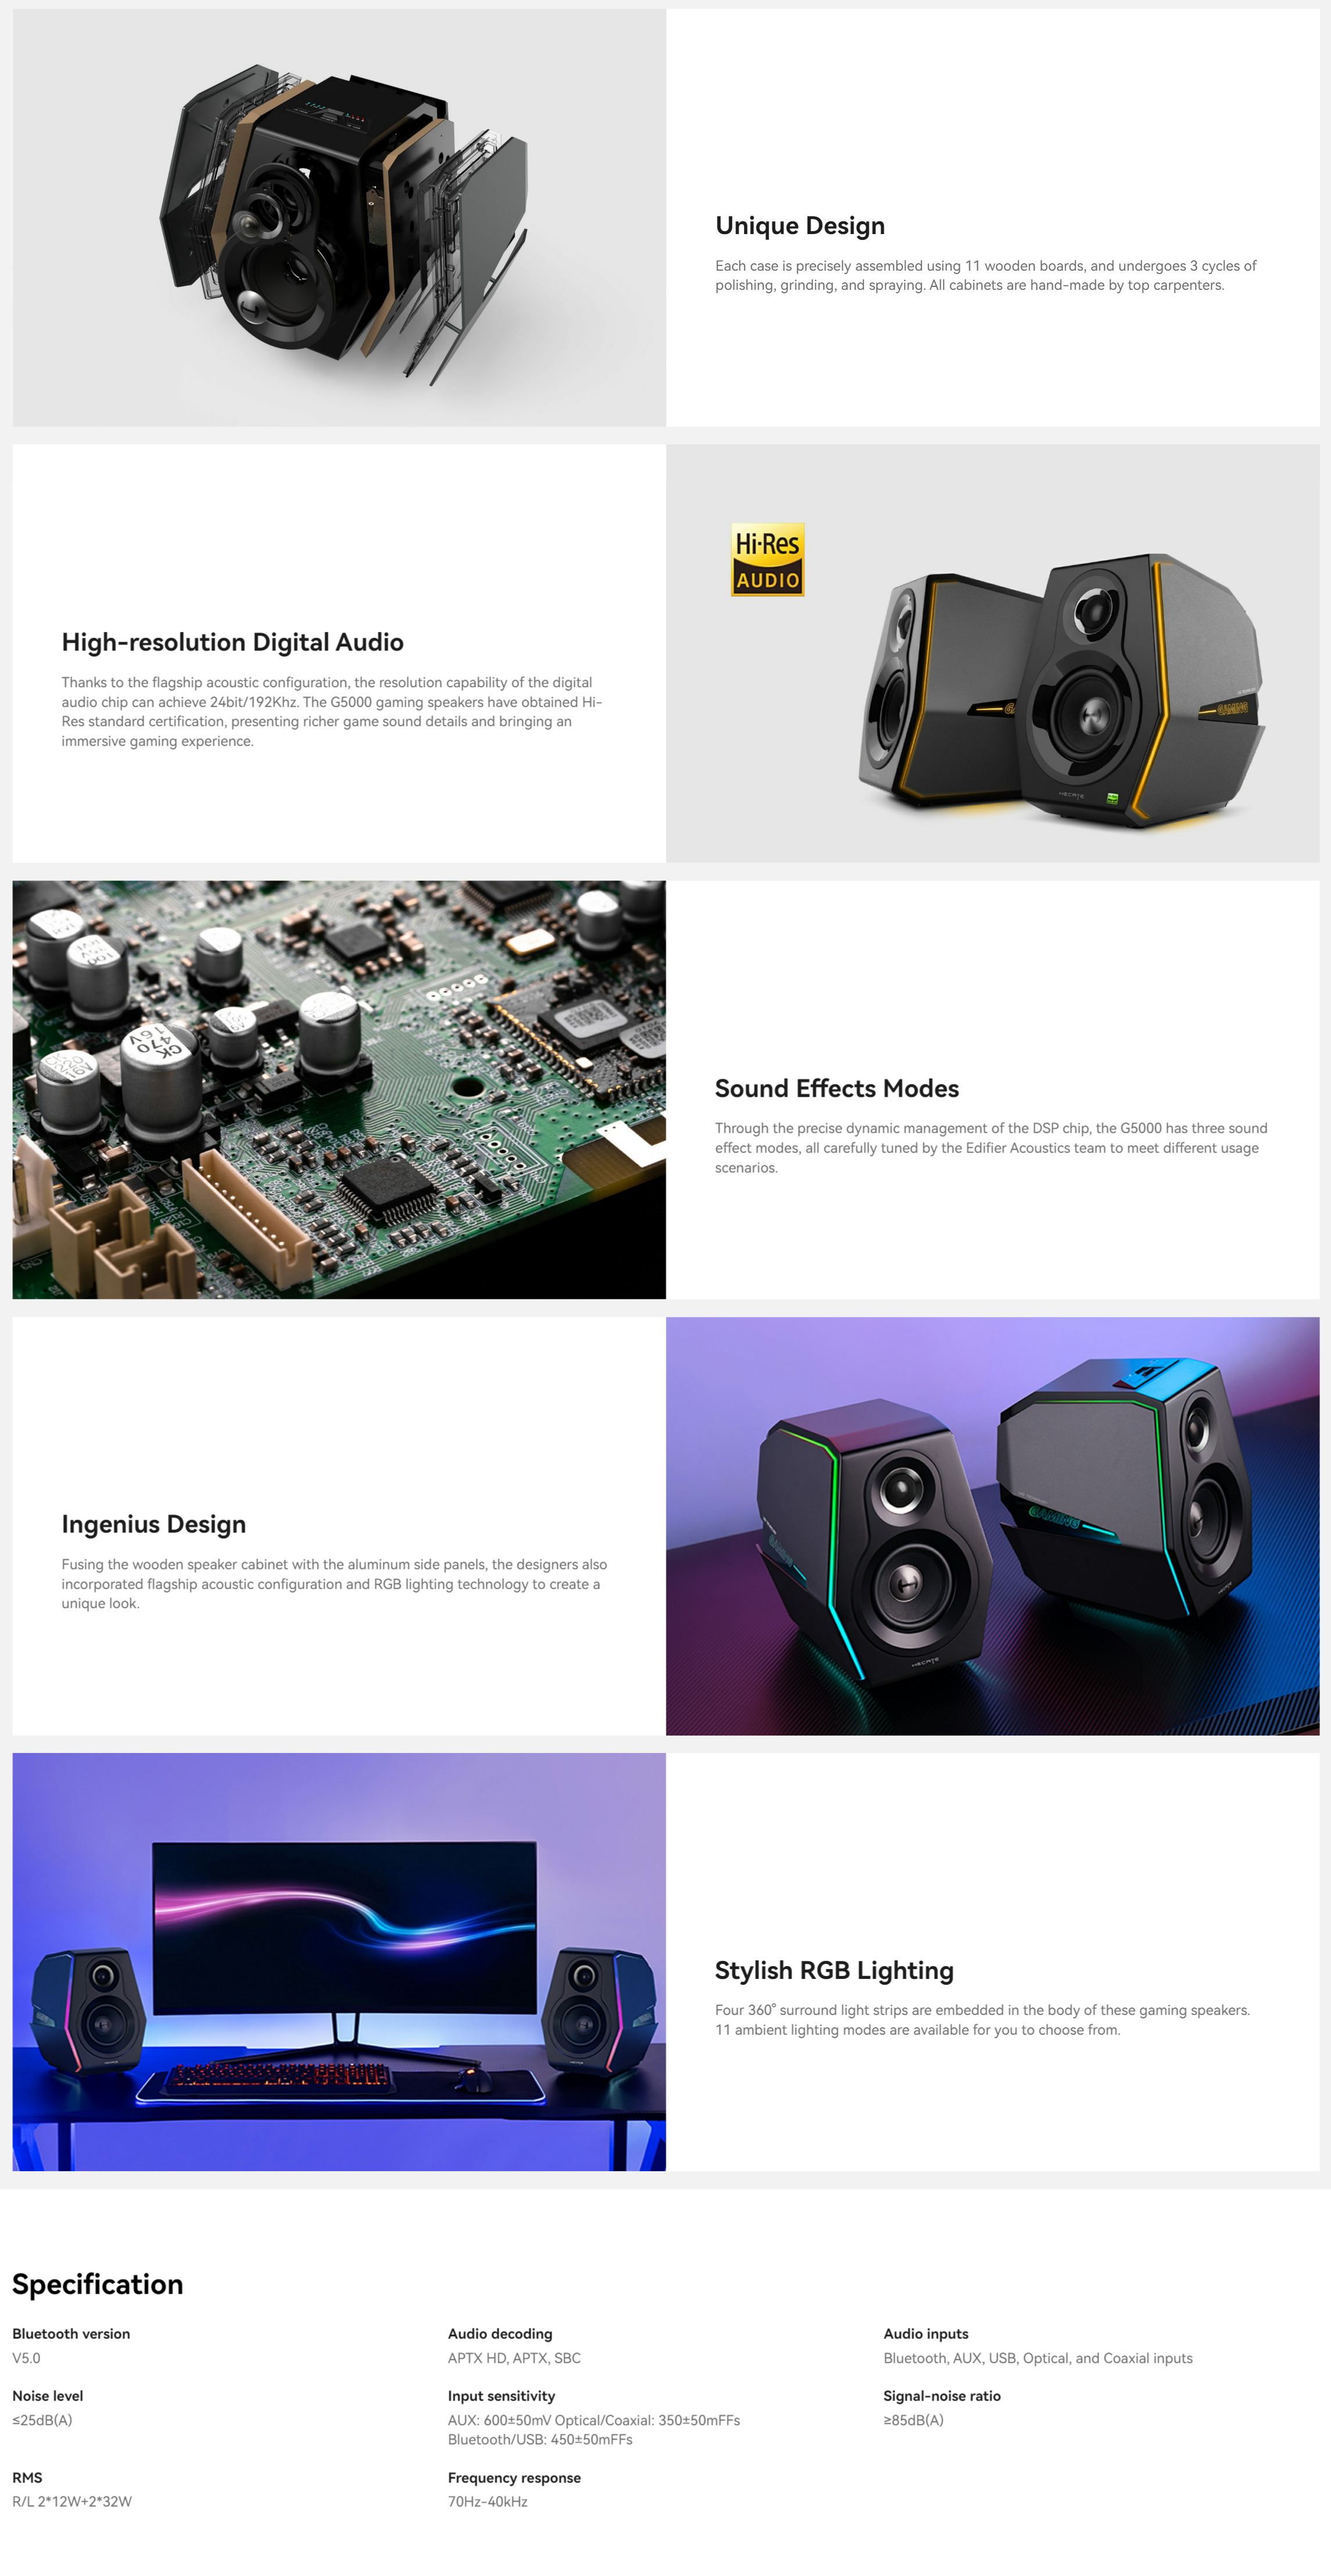 A large marketing image providing additional information about the product Edifier Hecate G5000 Bluetooth Gaming Speakers - Additional alt info not provided